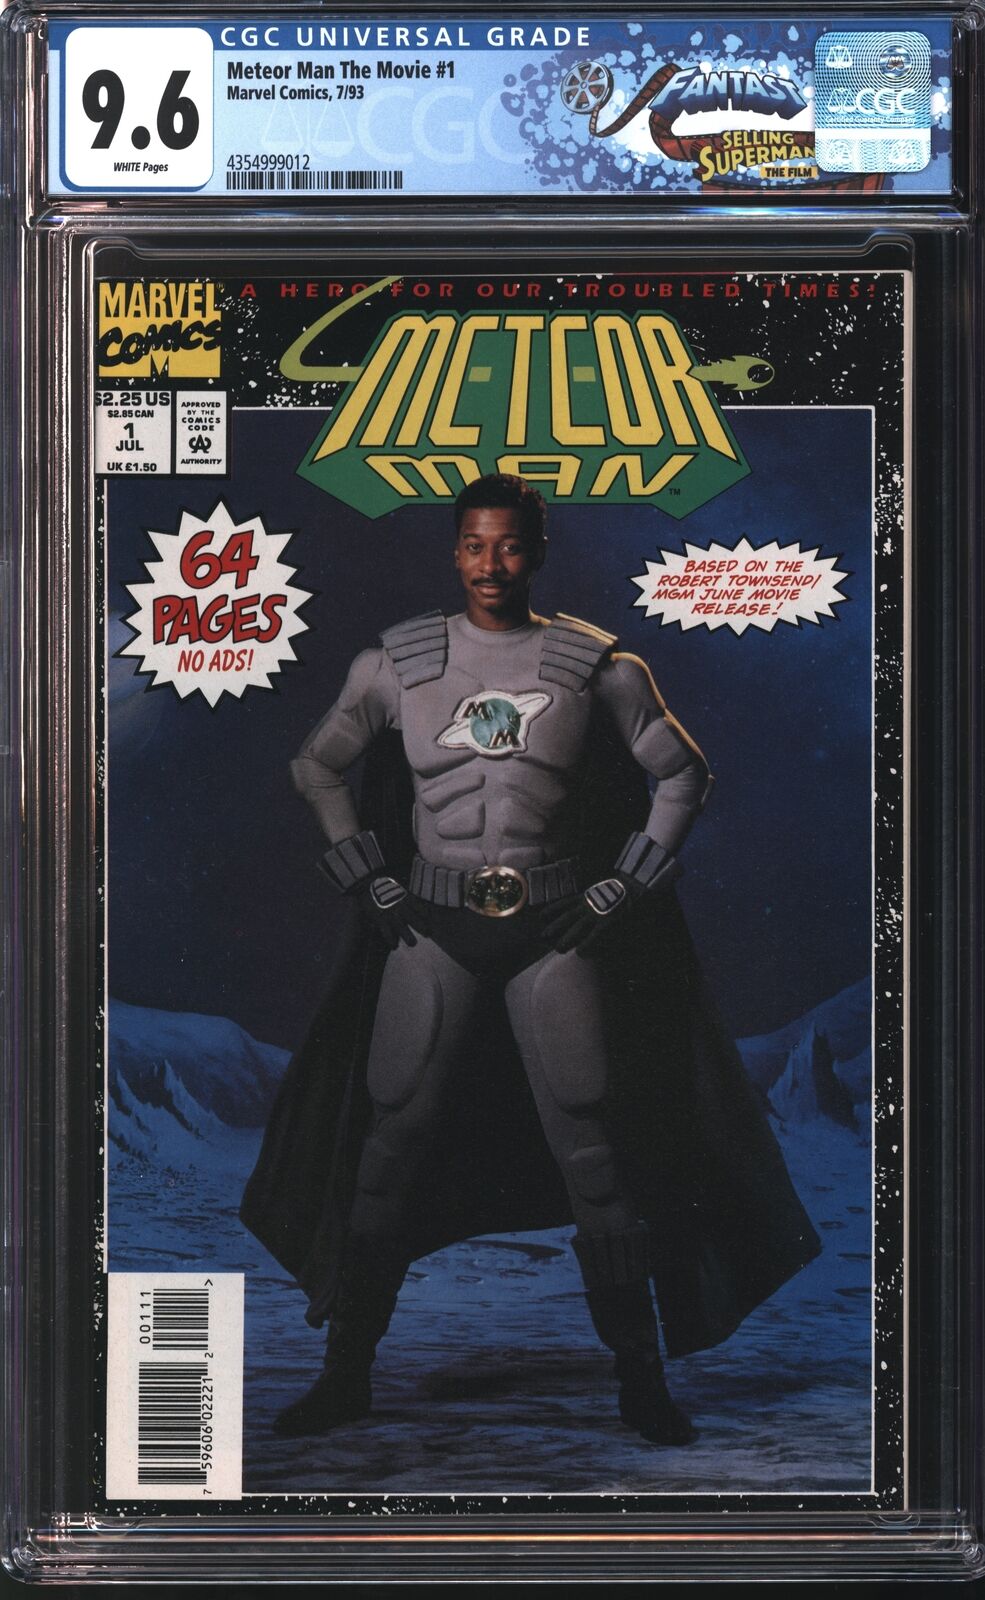 Marvel Meteor Man The Movie 1 7/93 FANTAST CGC 9.6 White Pages